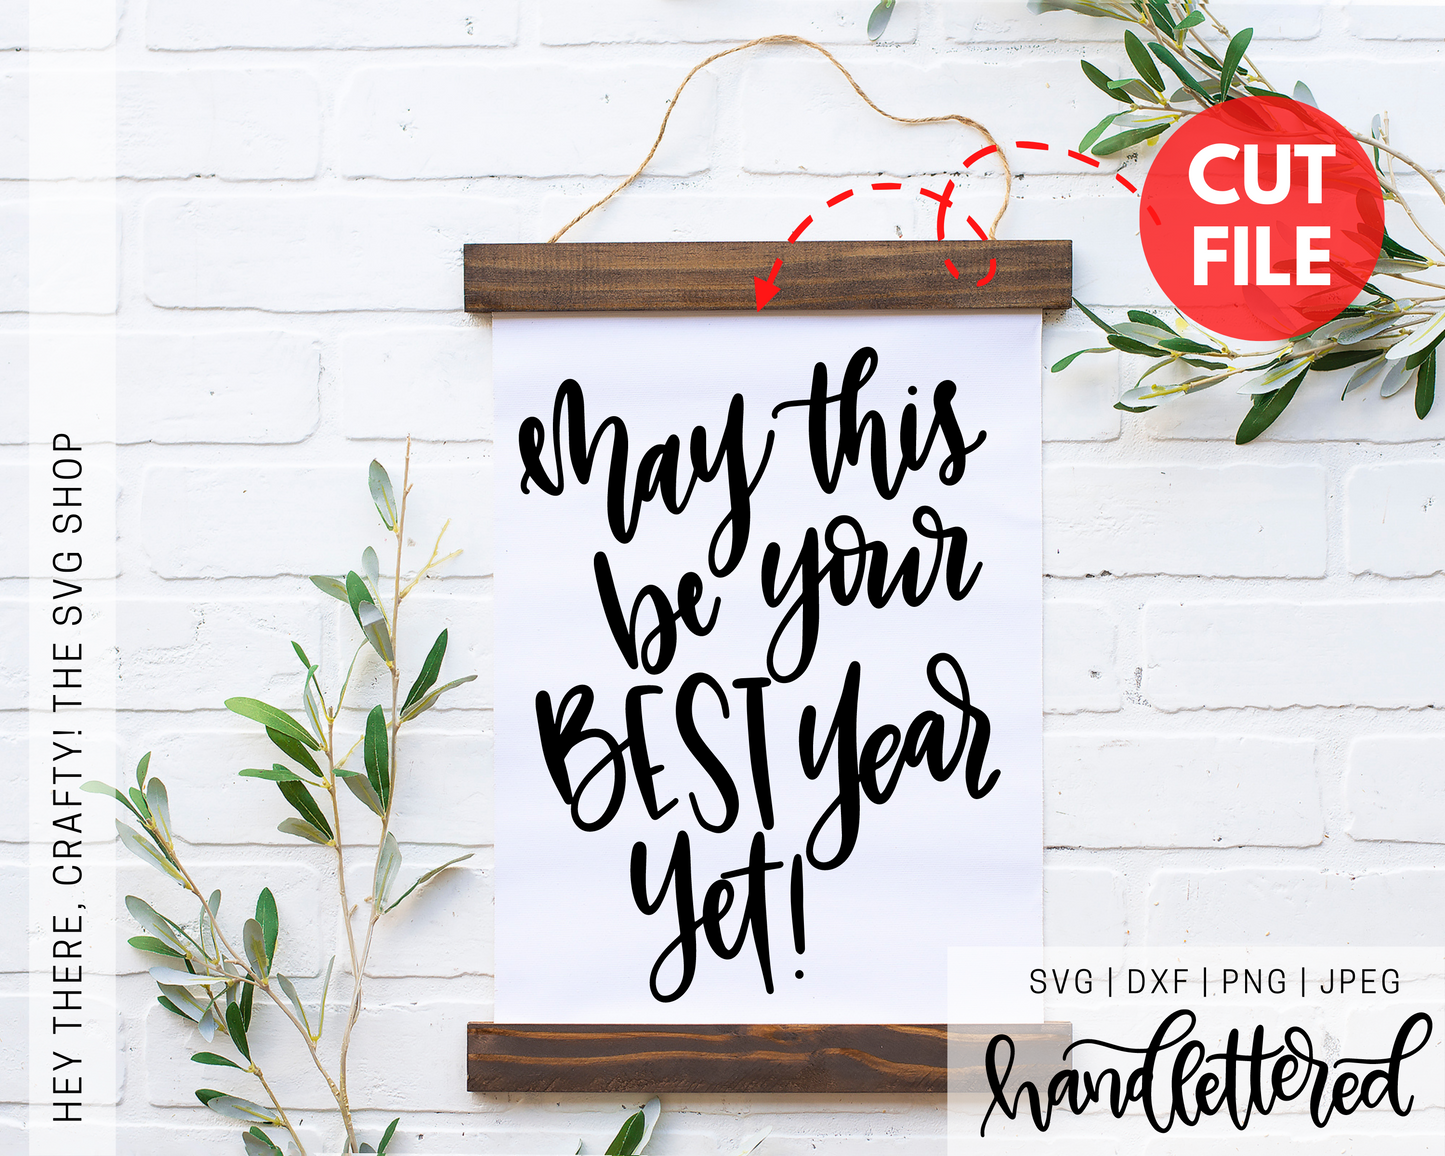 May This be Your Best Year Yet | SVG, PNG, DXF, JPEG